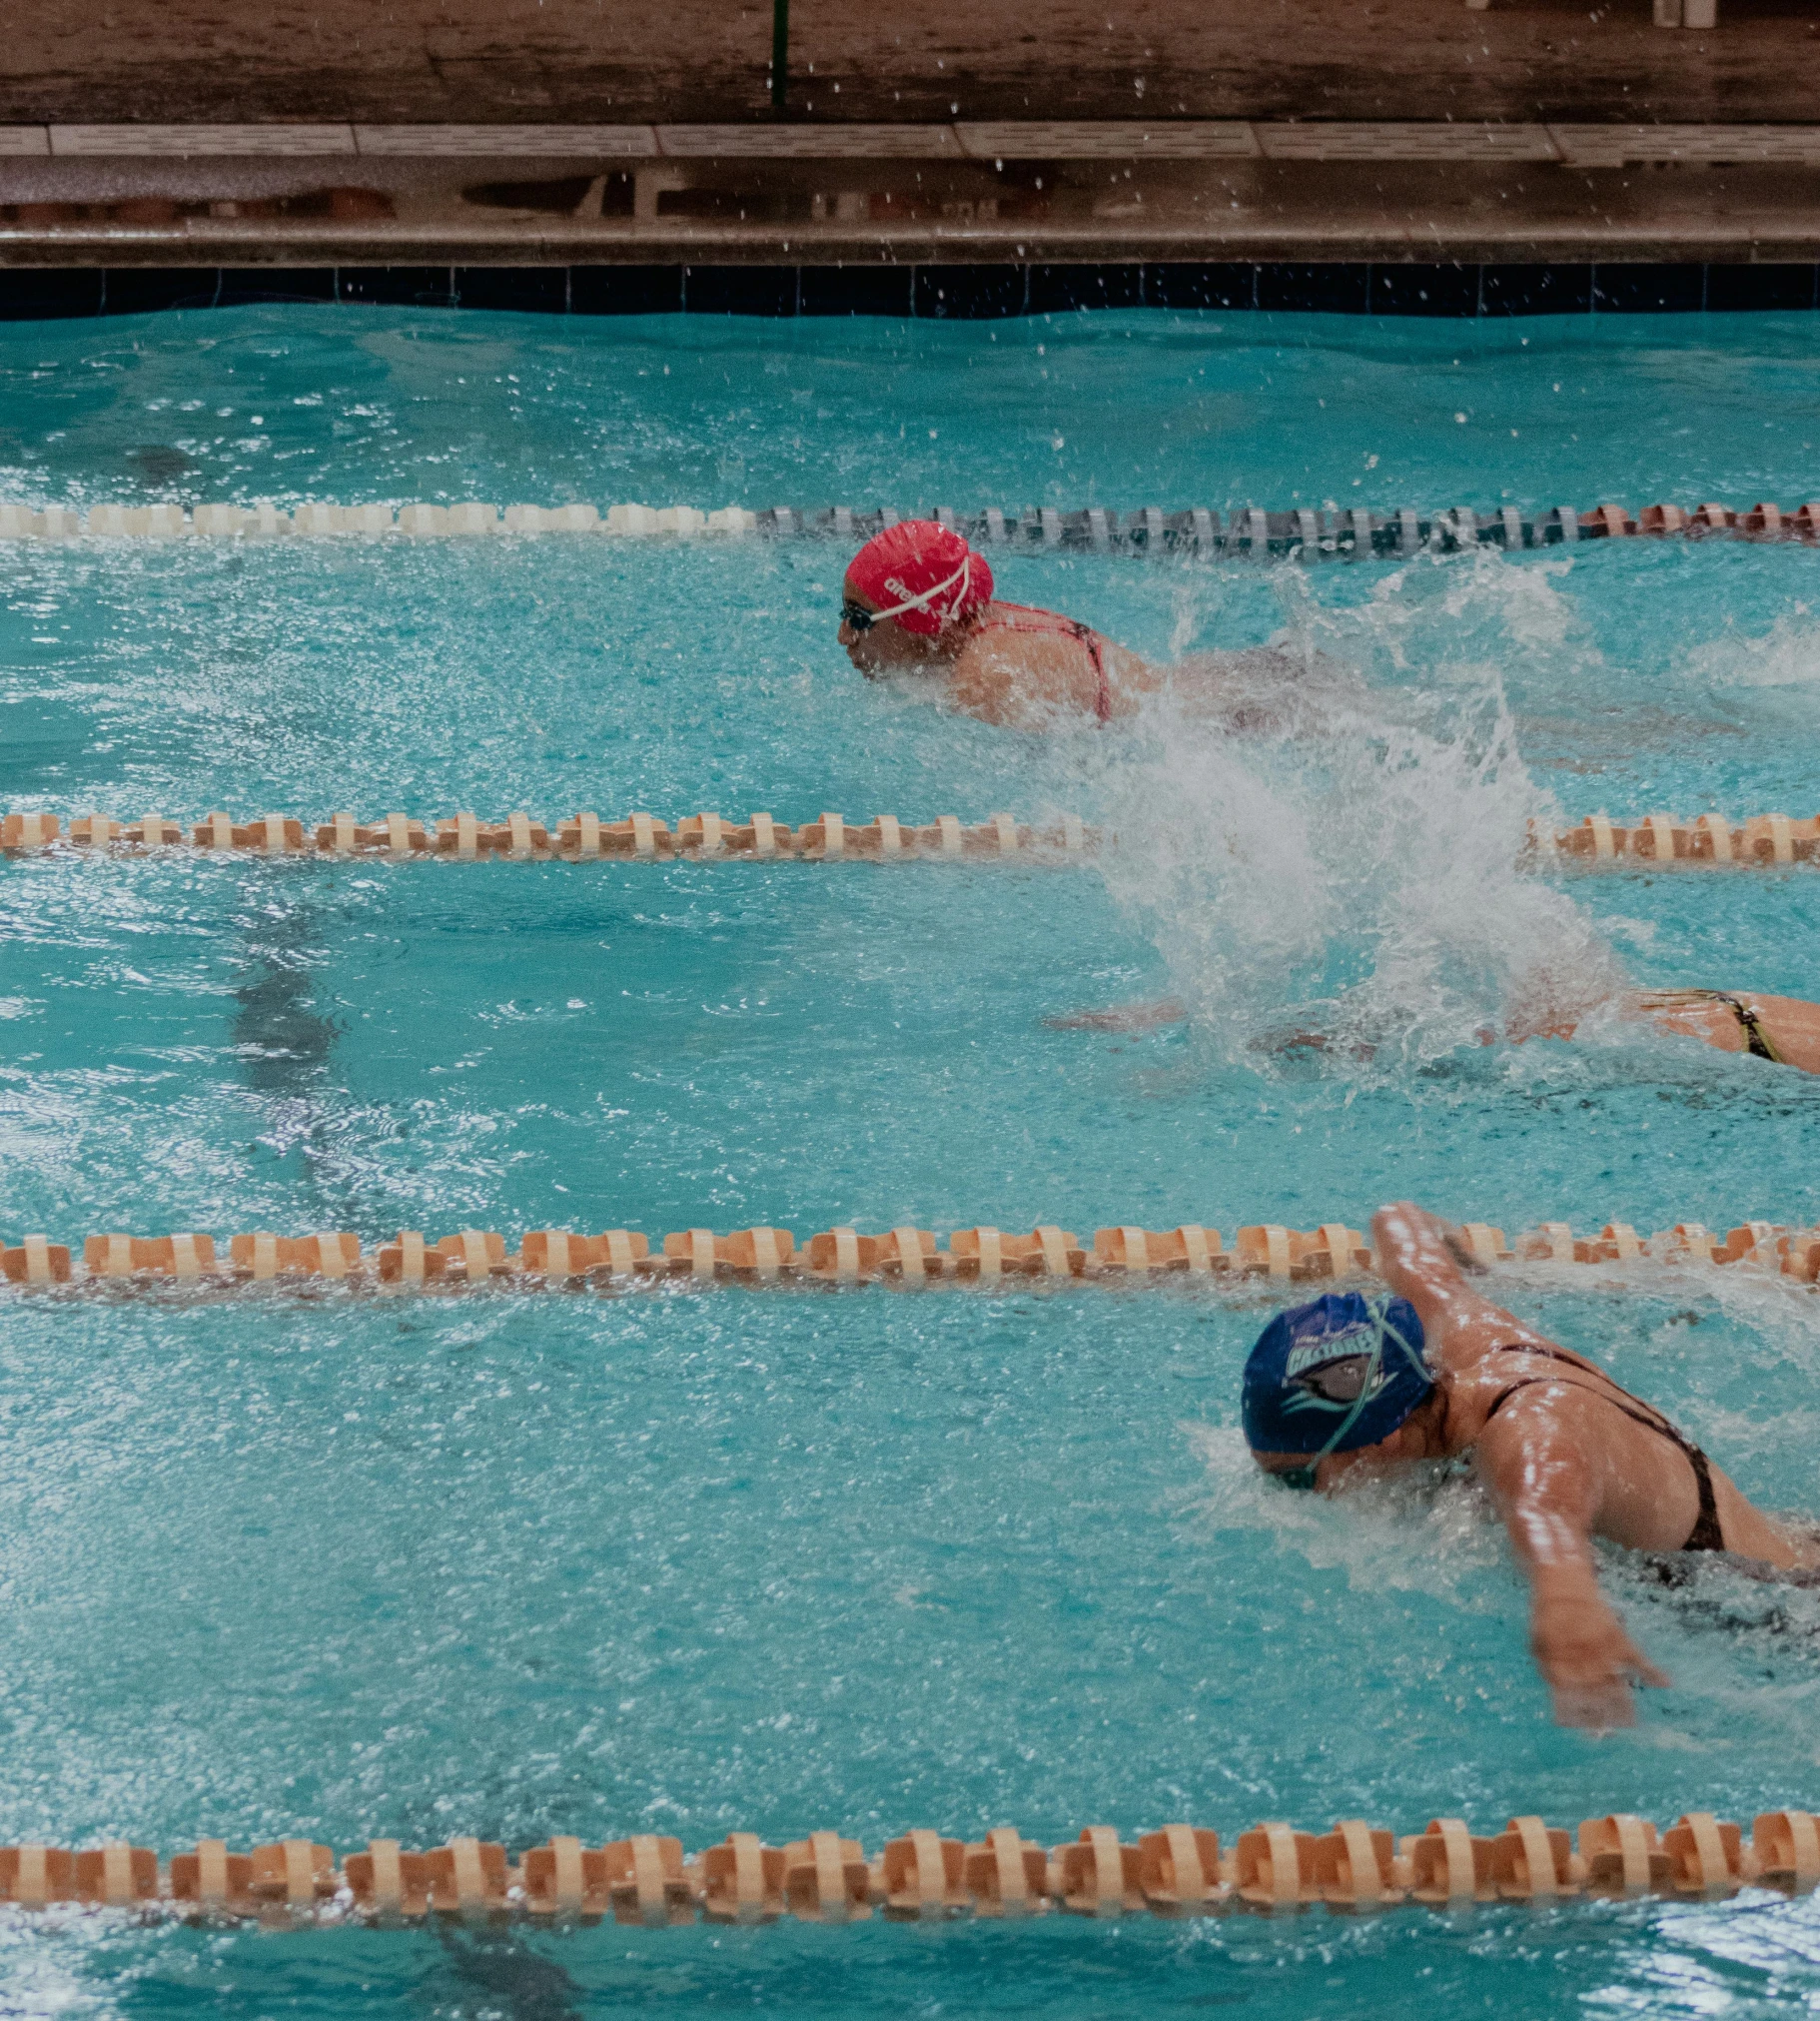 swimmers swim through the water at a swimming pool